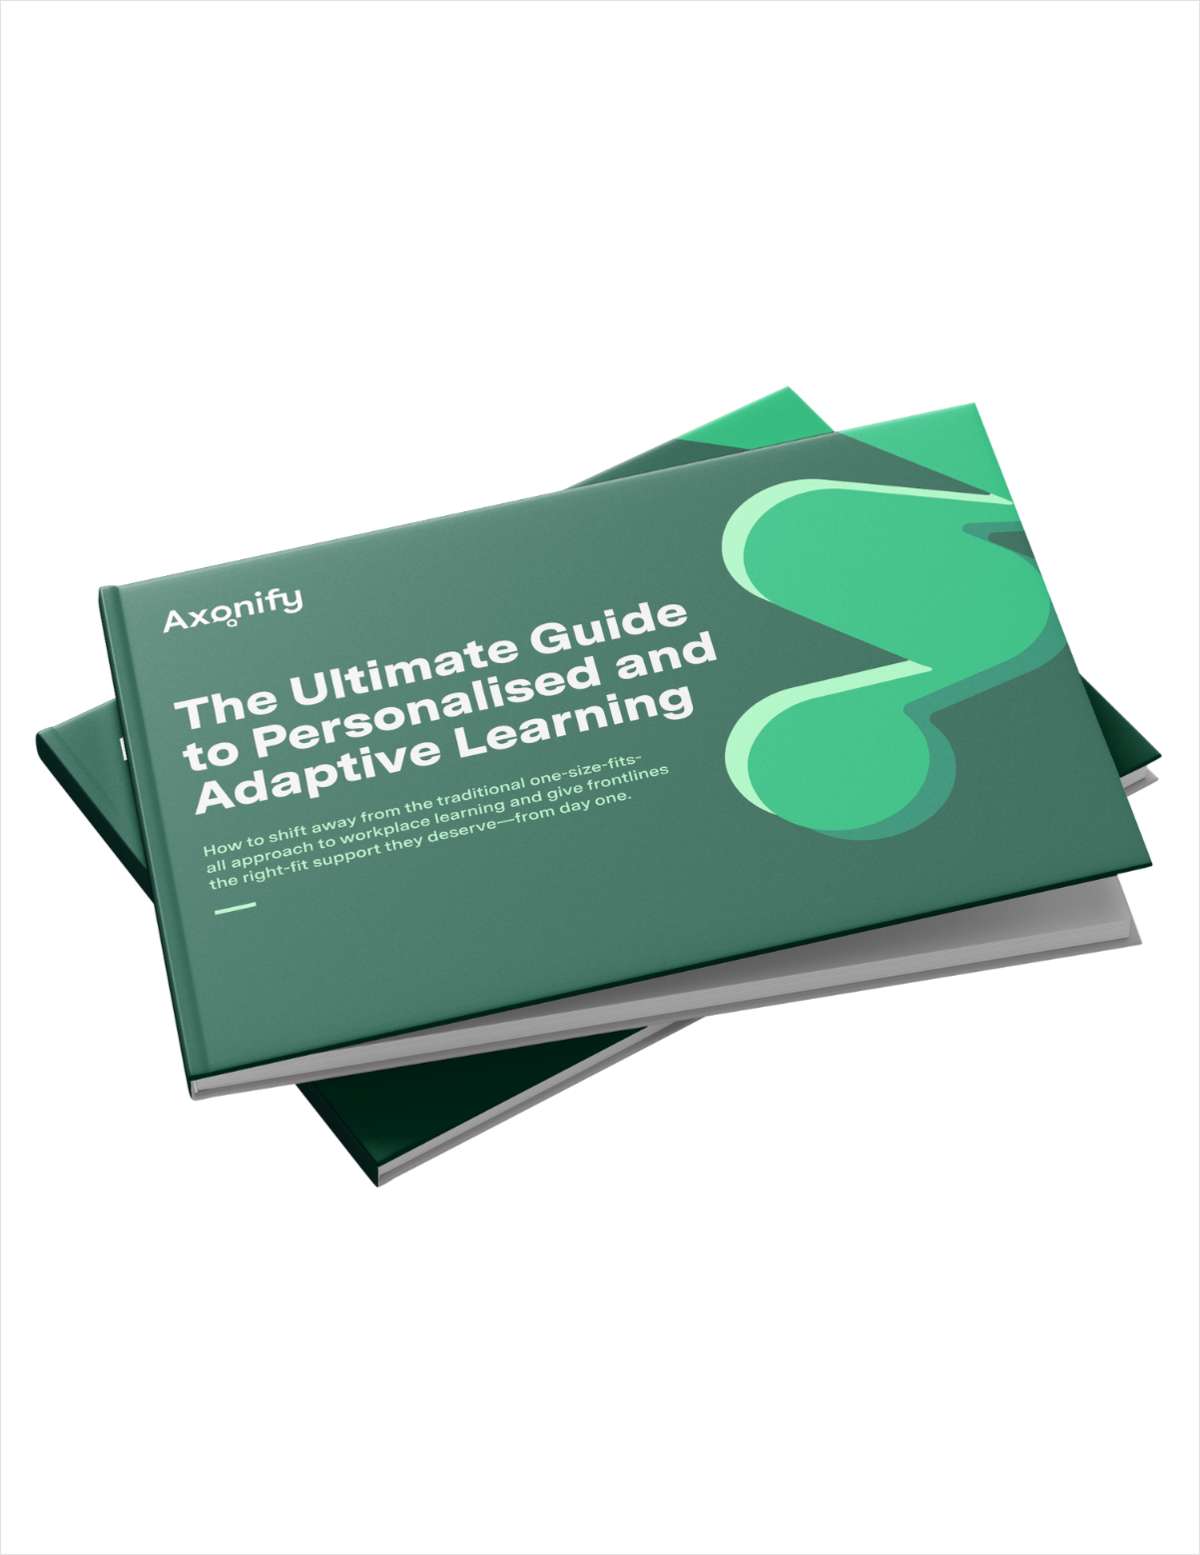 The Ultimate Guide to Personalised and Adaptive Learning